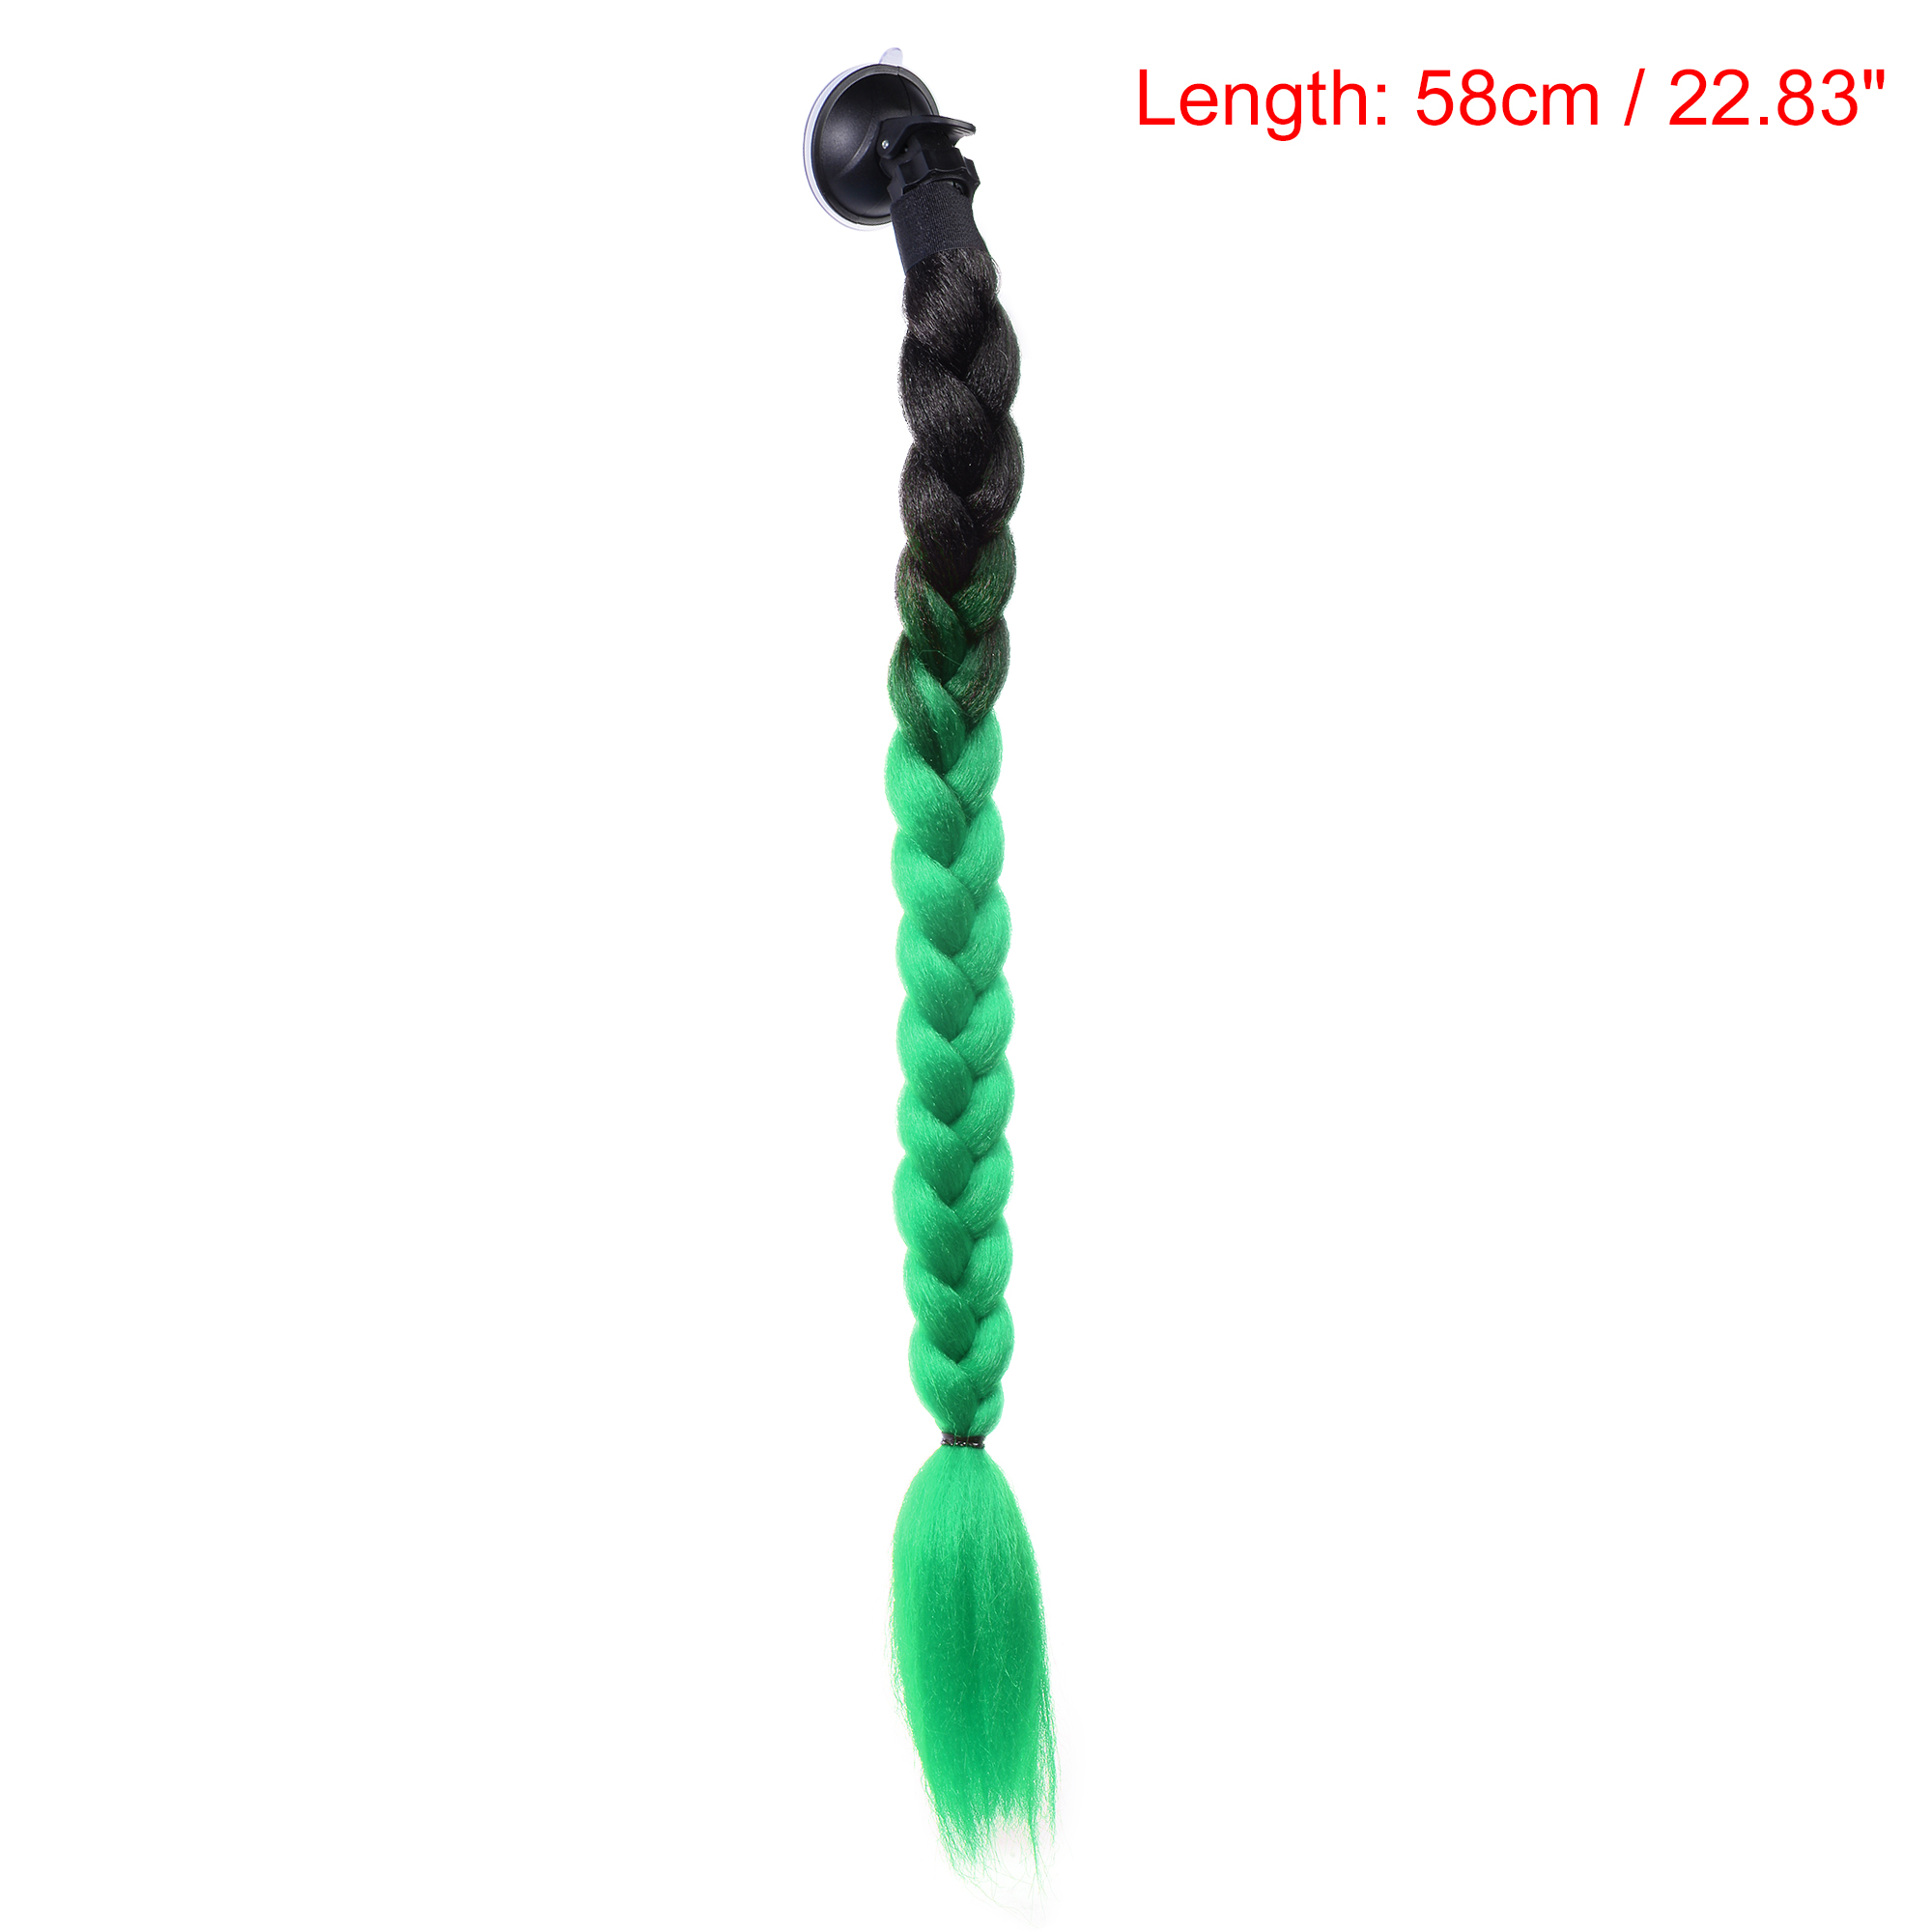 Unique Bargains Helmet Decor Pigtail Gradient Braid with Suction cup for Motorcycle Green Black